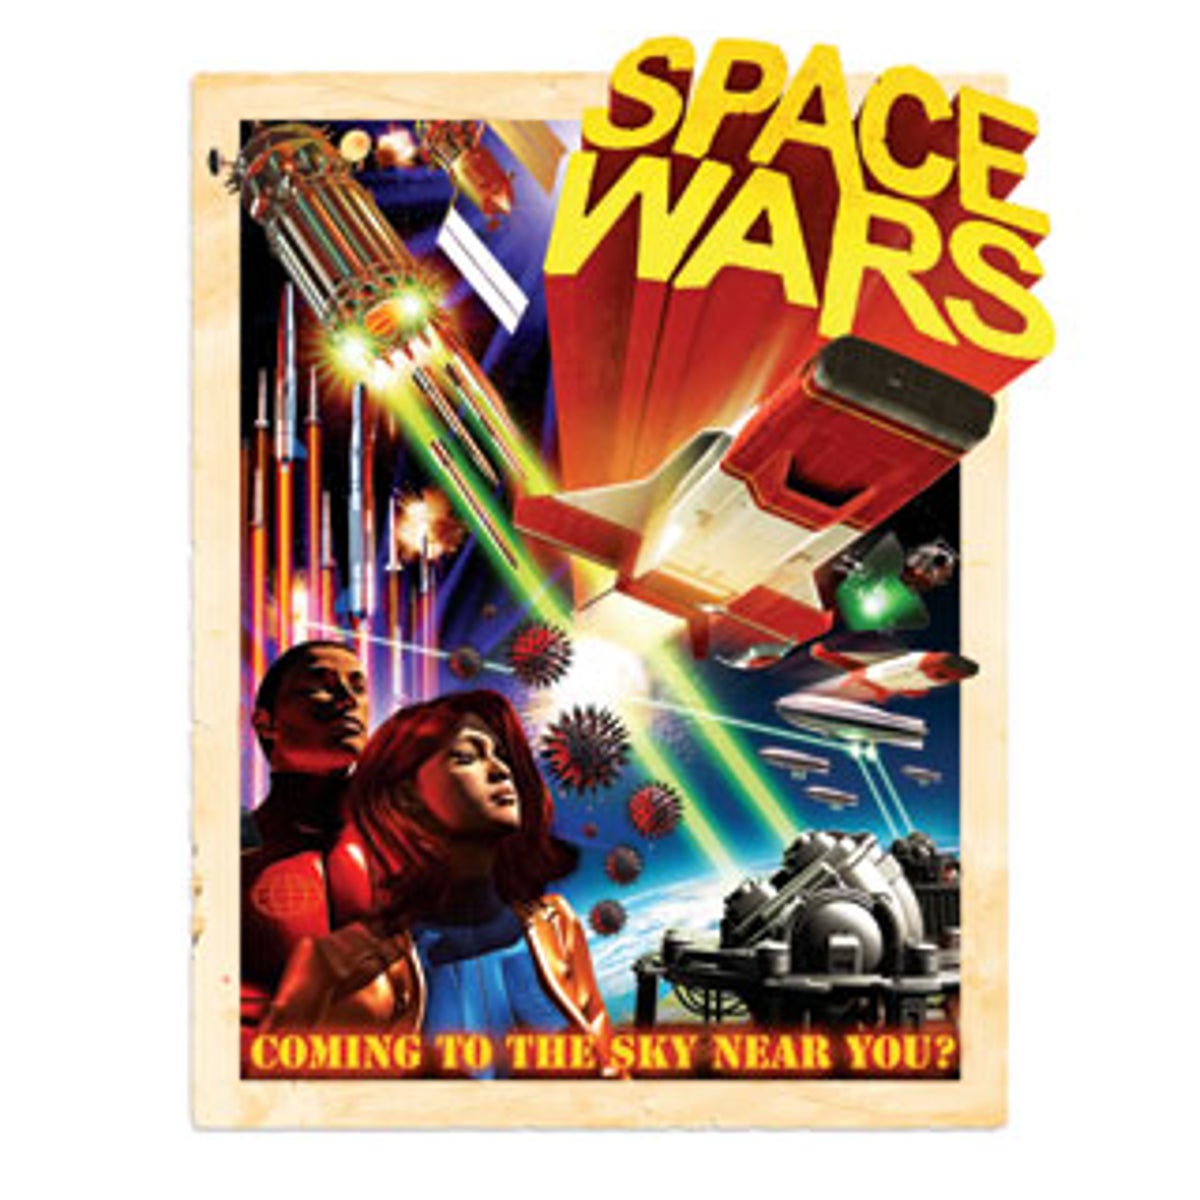 Space Wars - Coming to the Sky Near You?